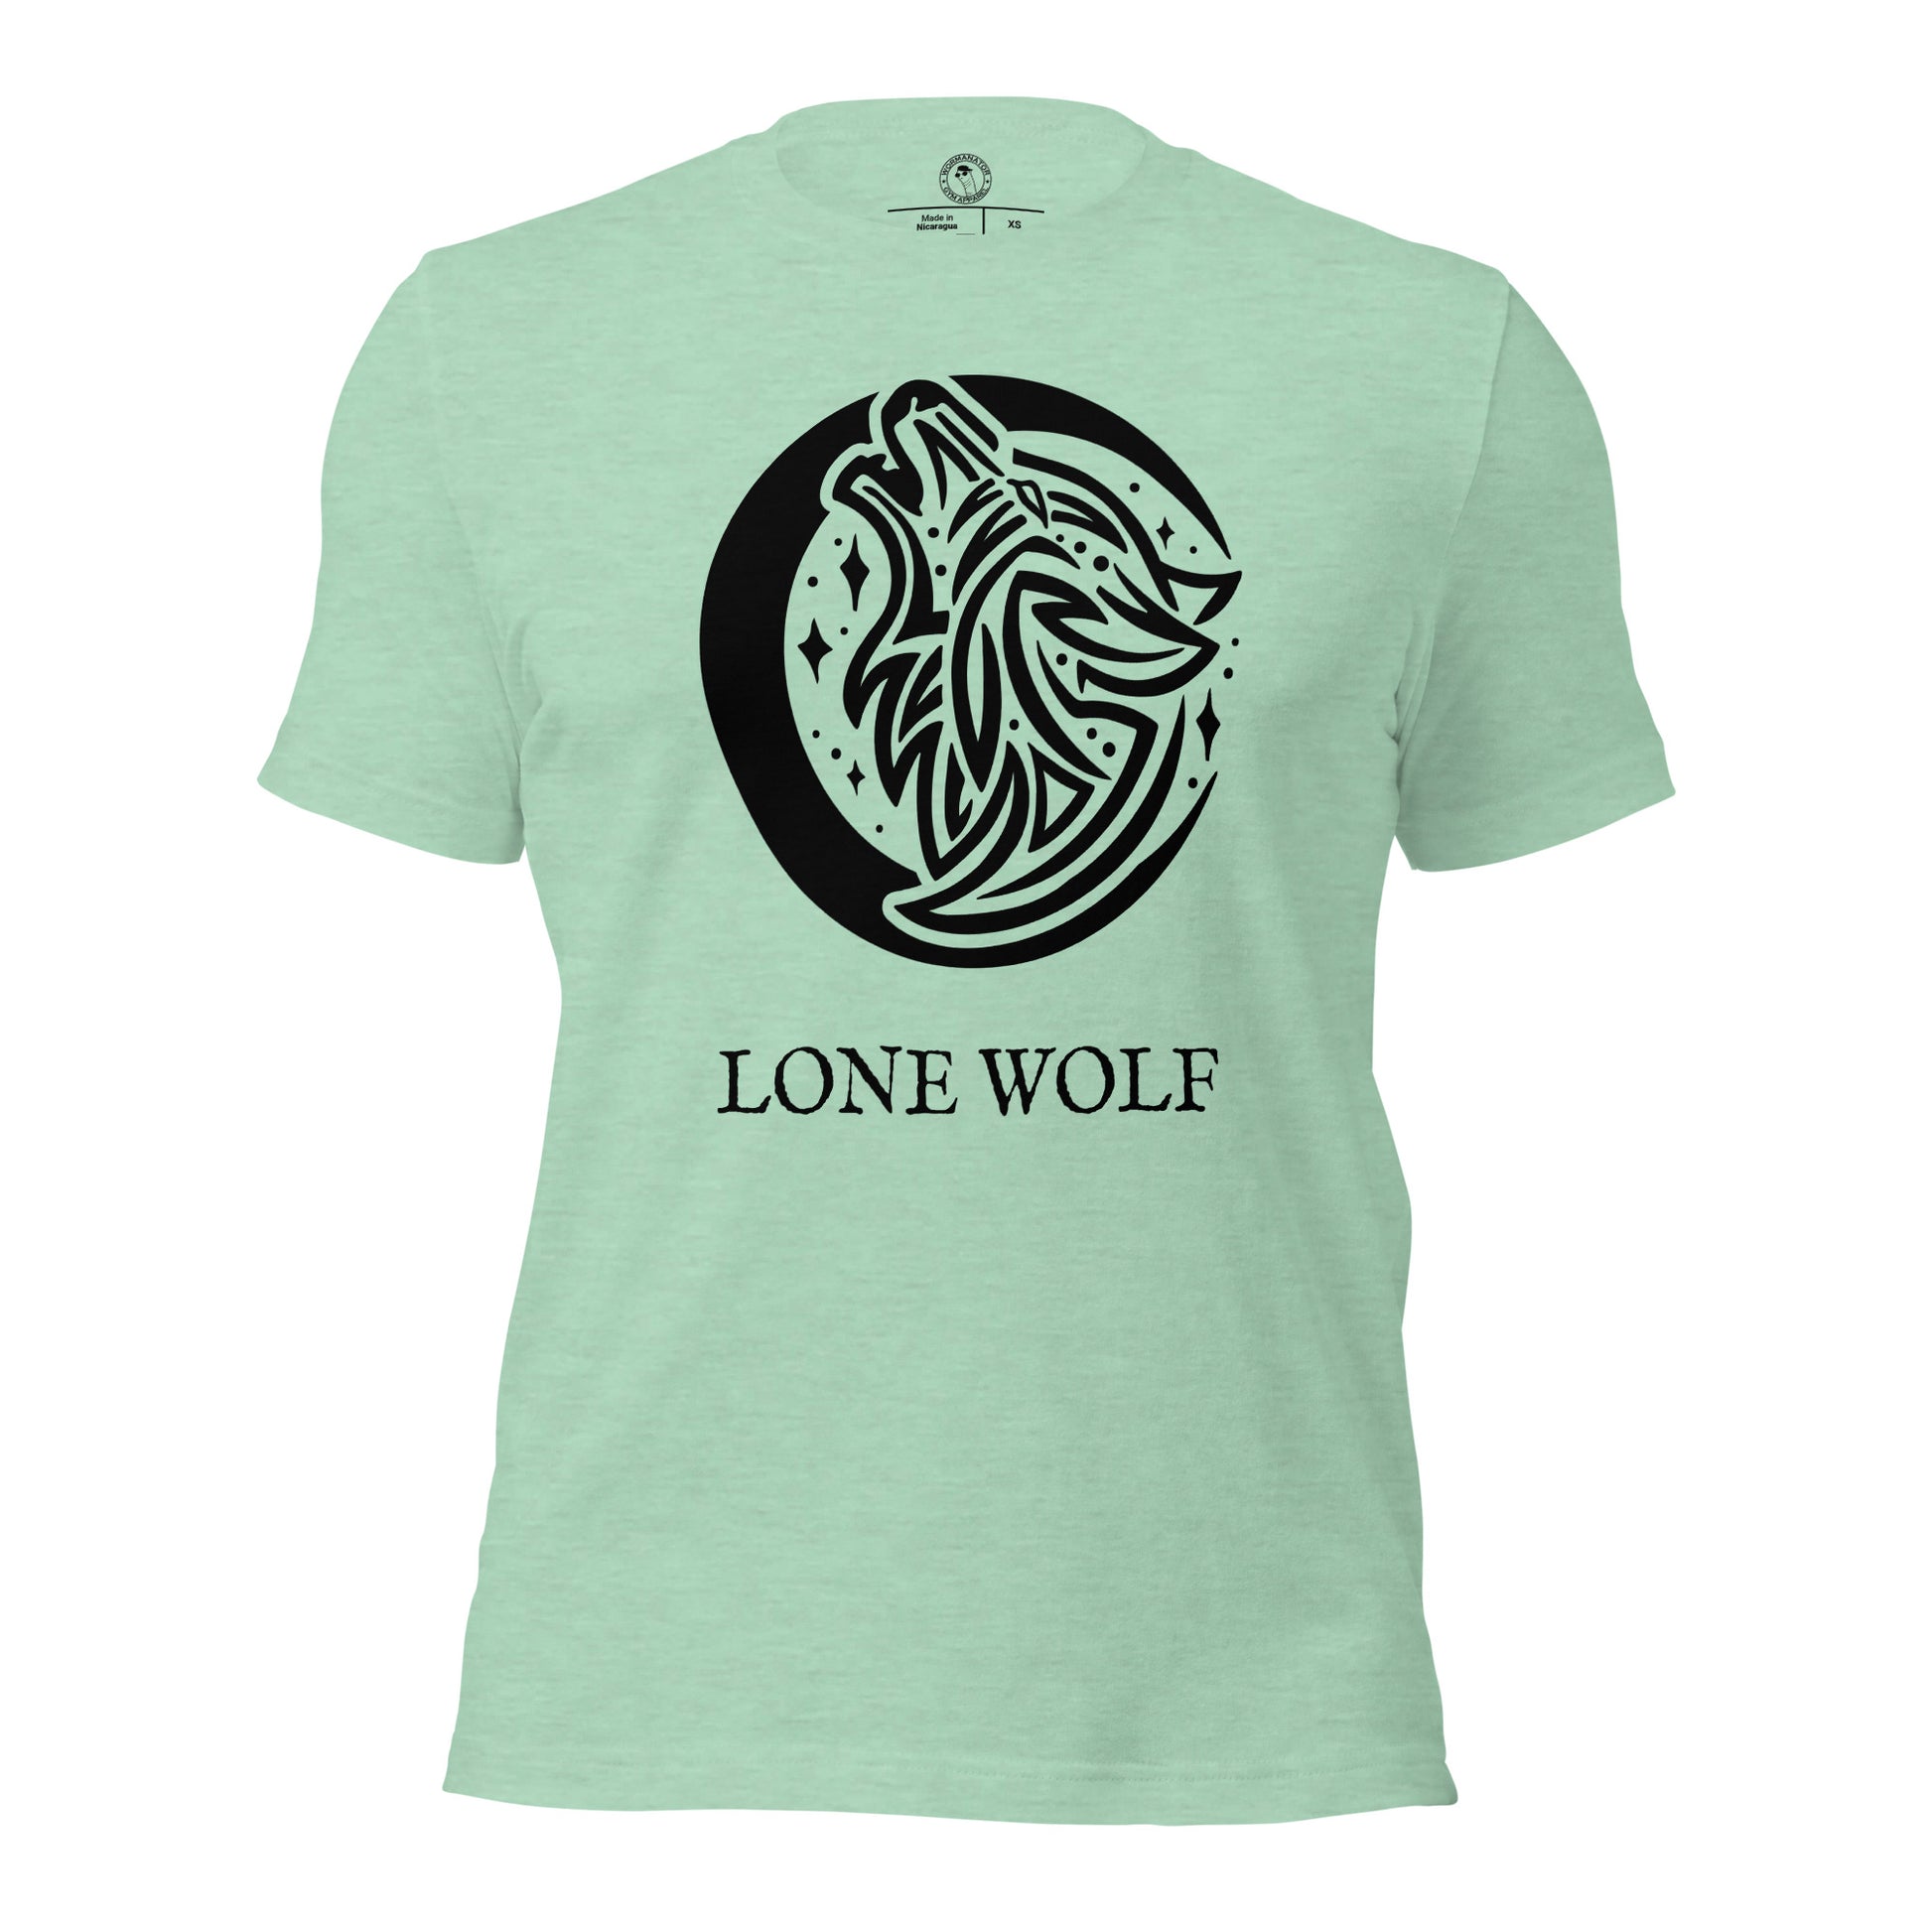 Lone Wolf Shirt in Heather Prism Mint